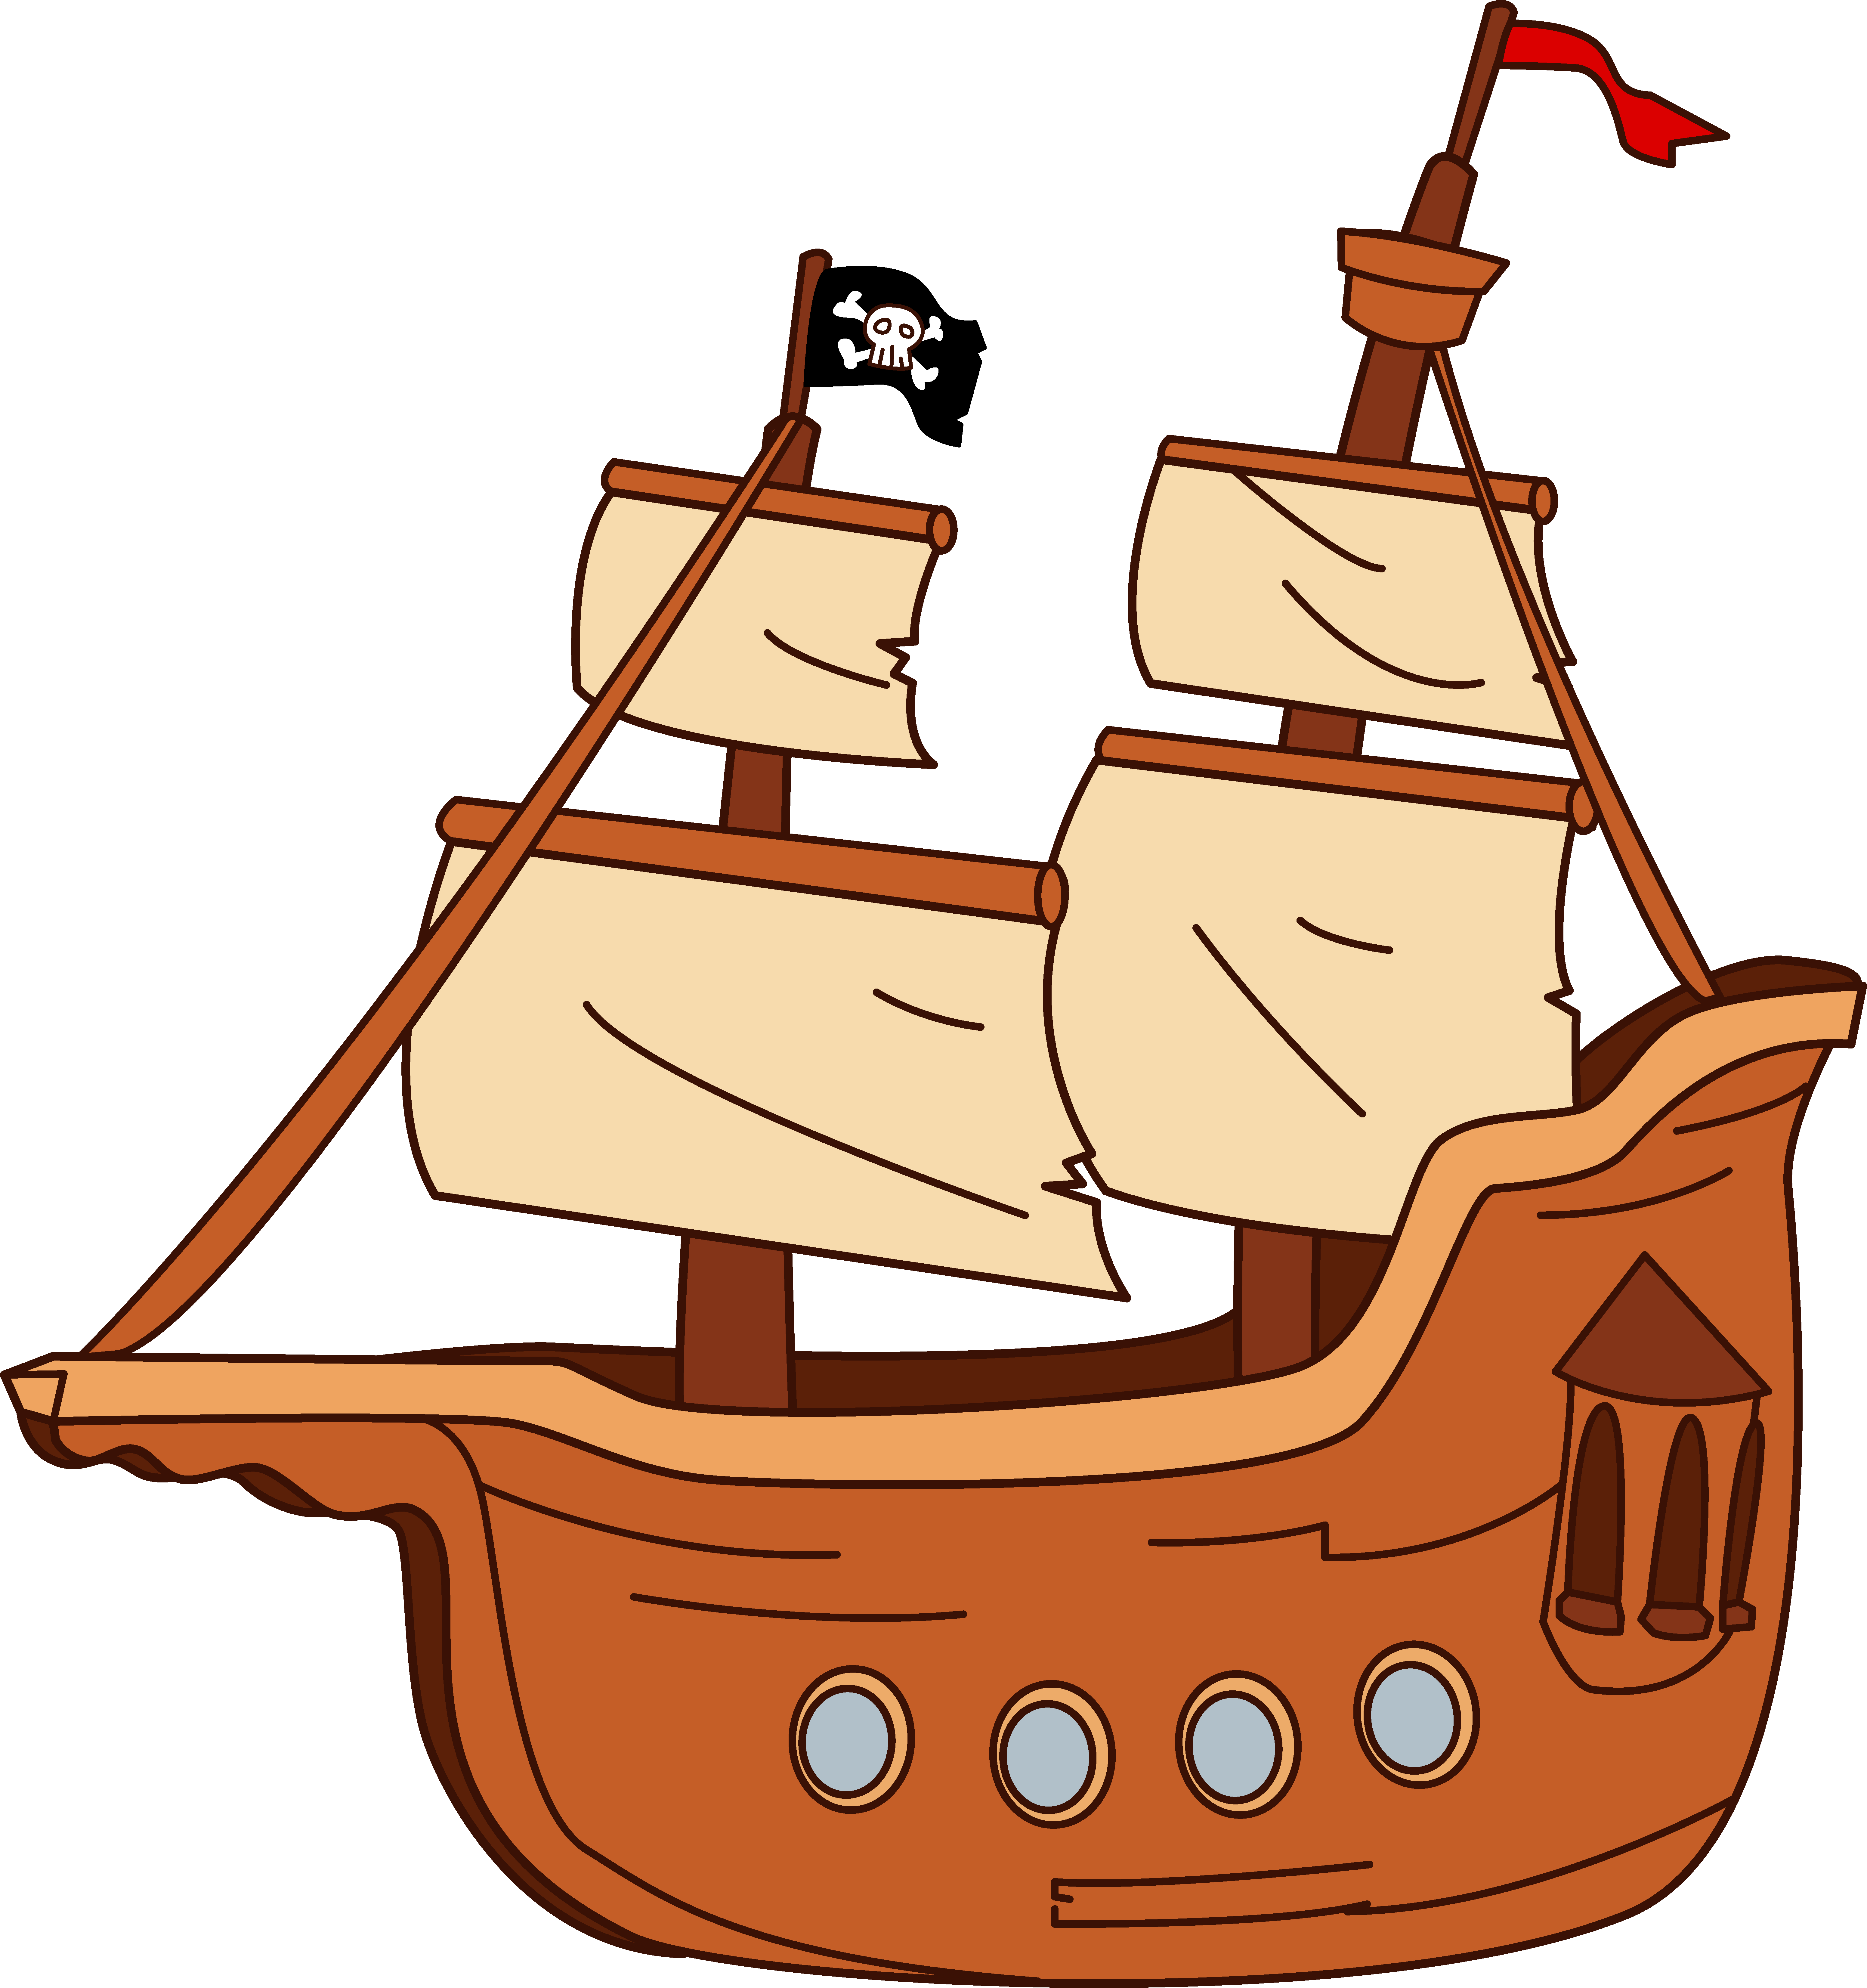 Boats, Pirate ships and Google